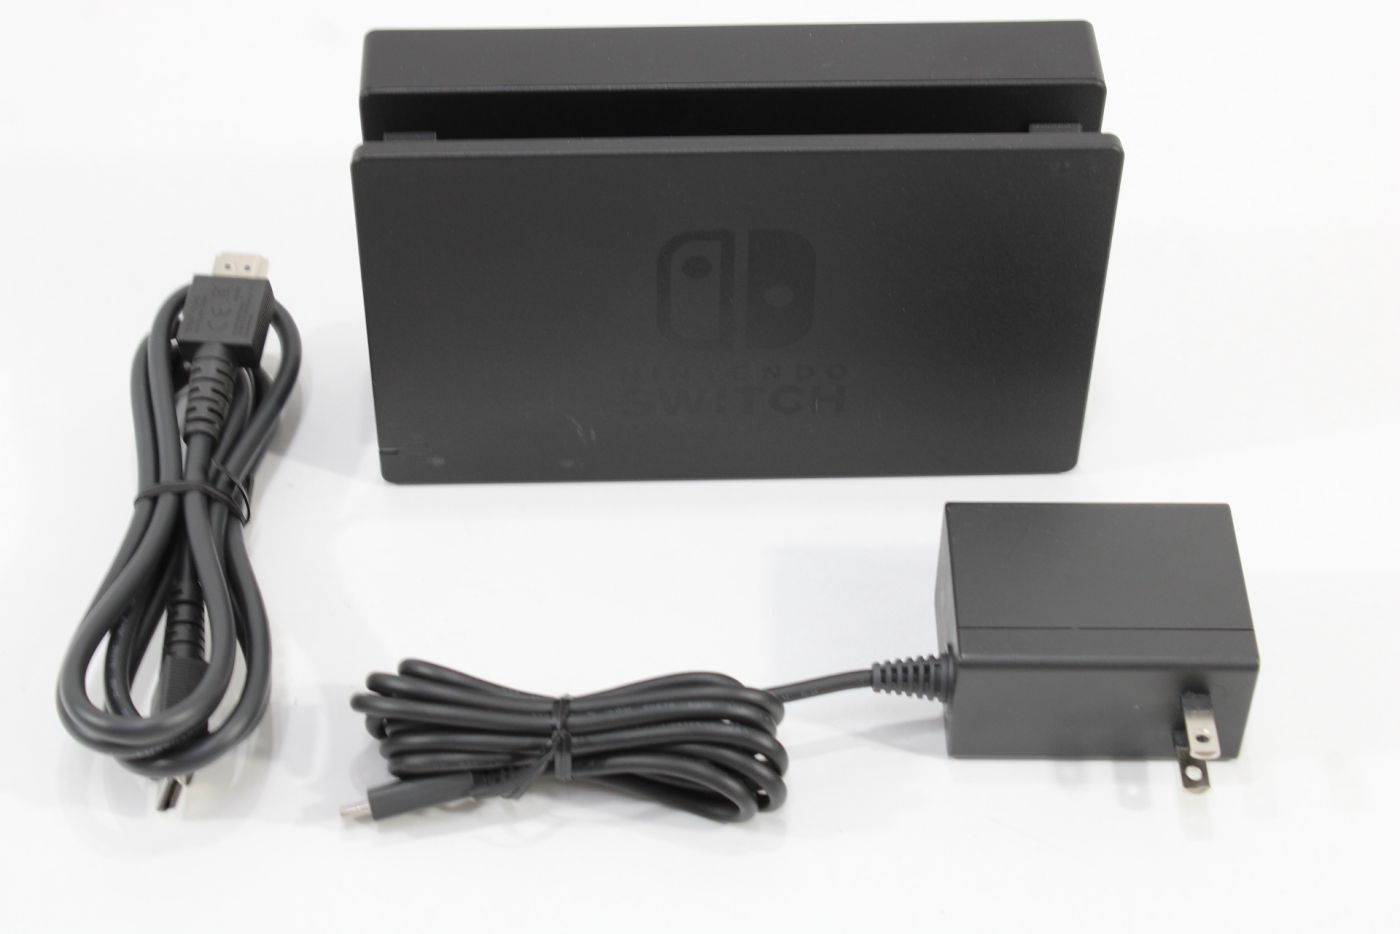 Official Nintendo Switch Dock AC Adapter & HDMI Cord All OEM (B) – Retro  Games Japan